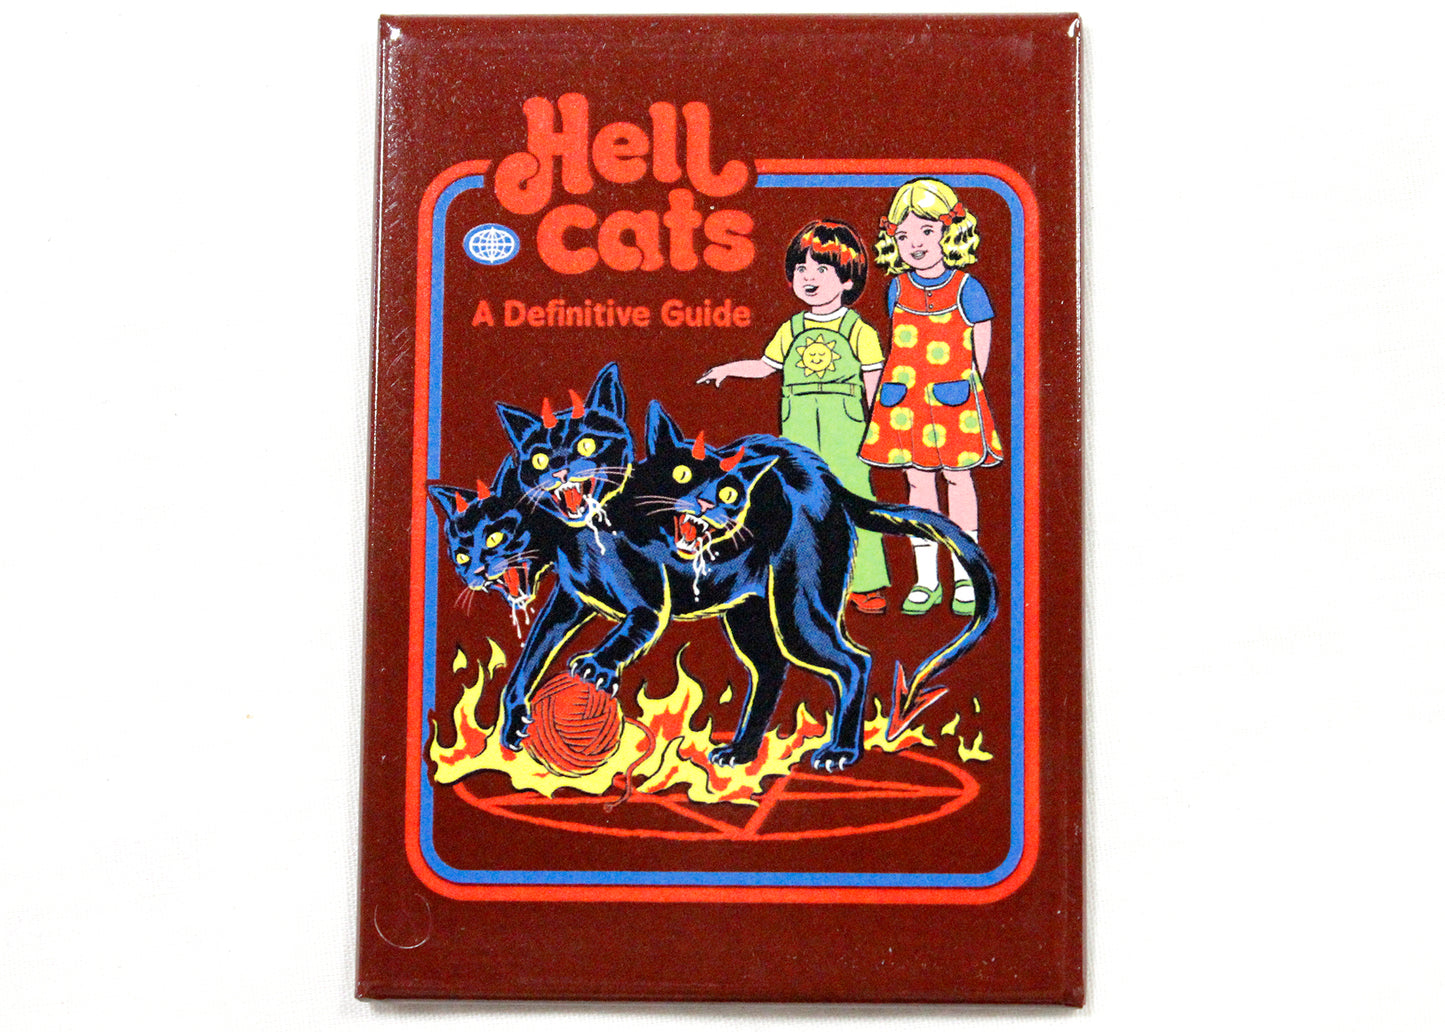 Hell Cats Magnet